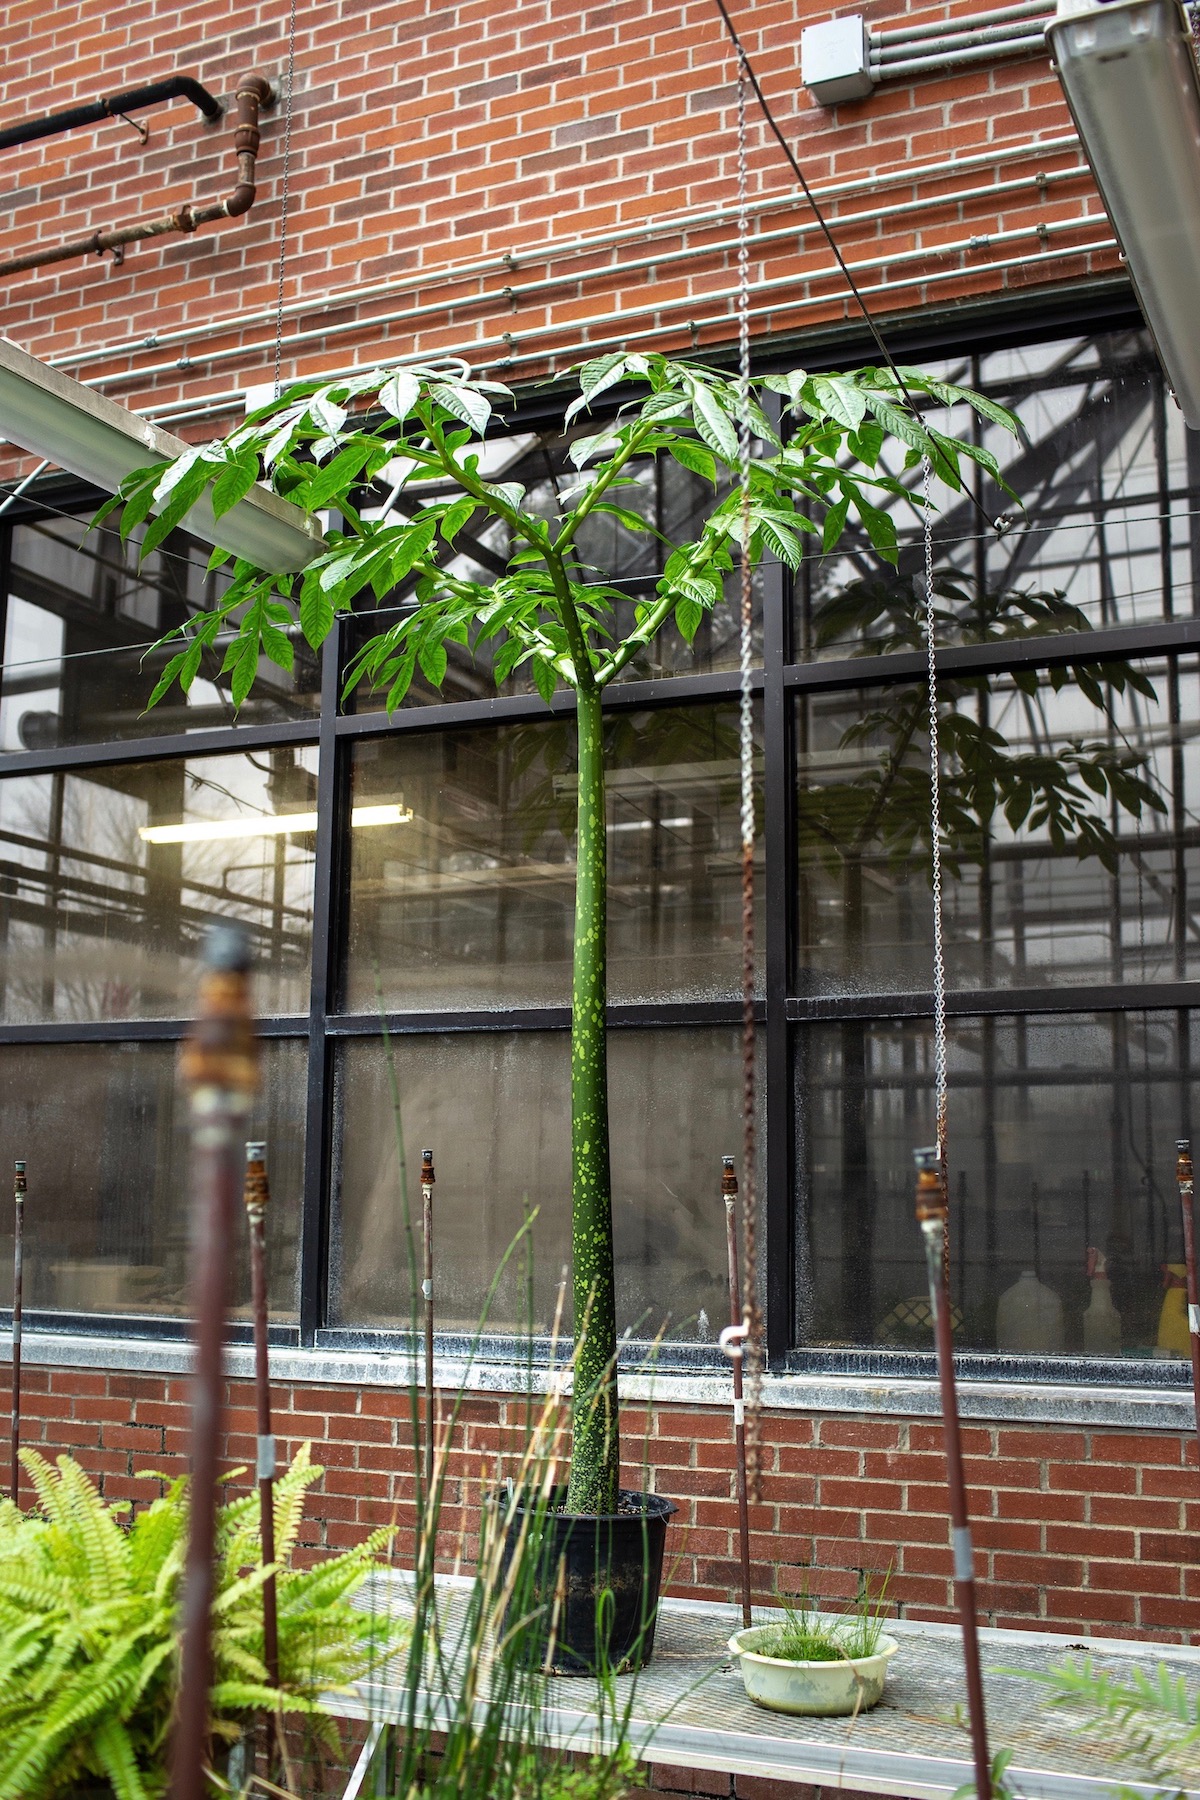 Austin Peay's towering corpse flower plant is will go through several more leaf-and-dormancy cylces before blooming. The bloom should happen in four to six years.